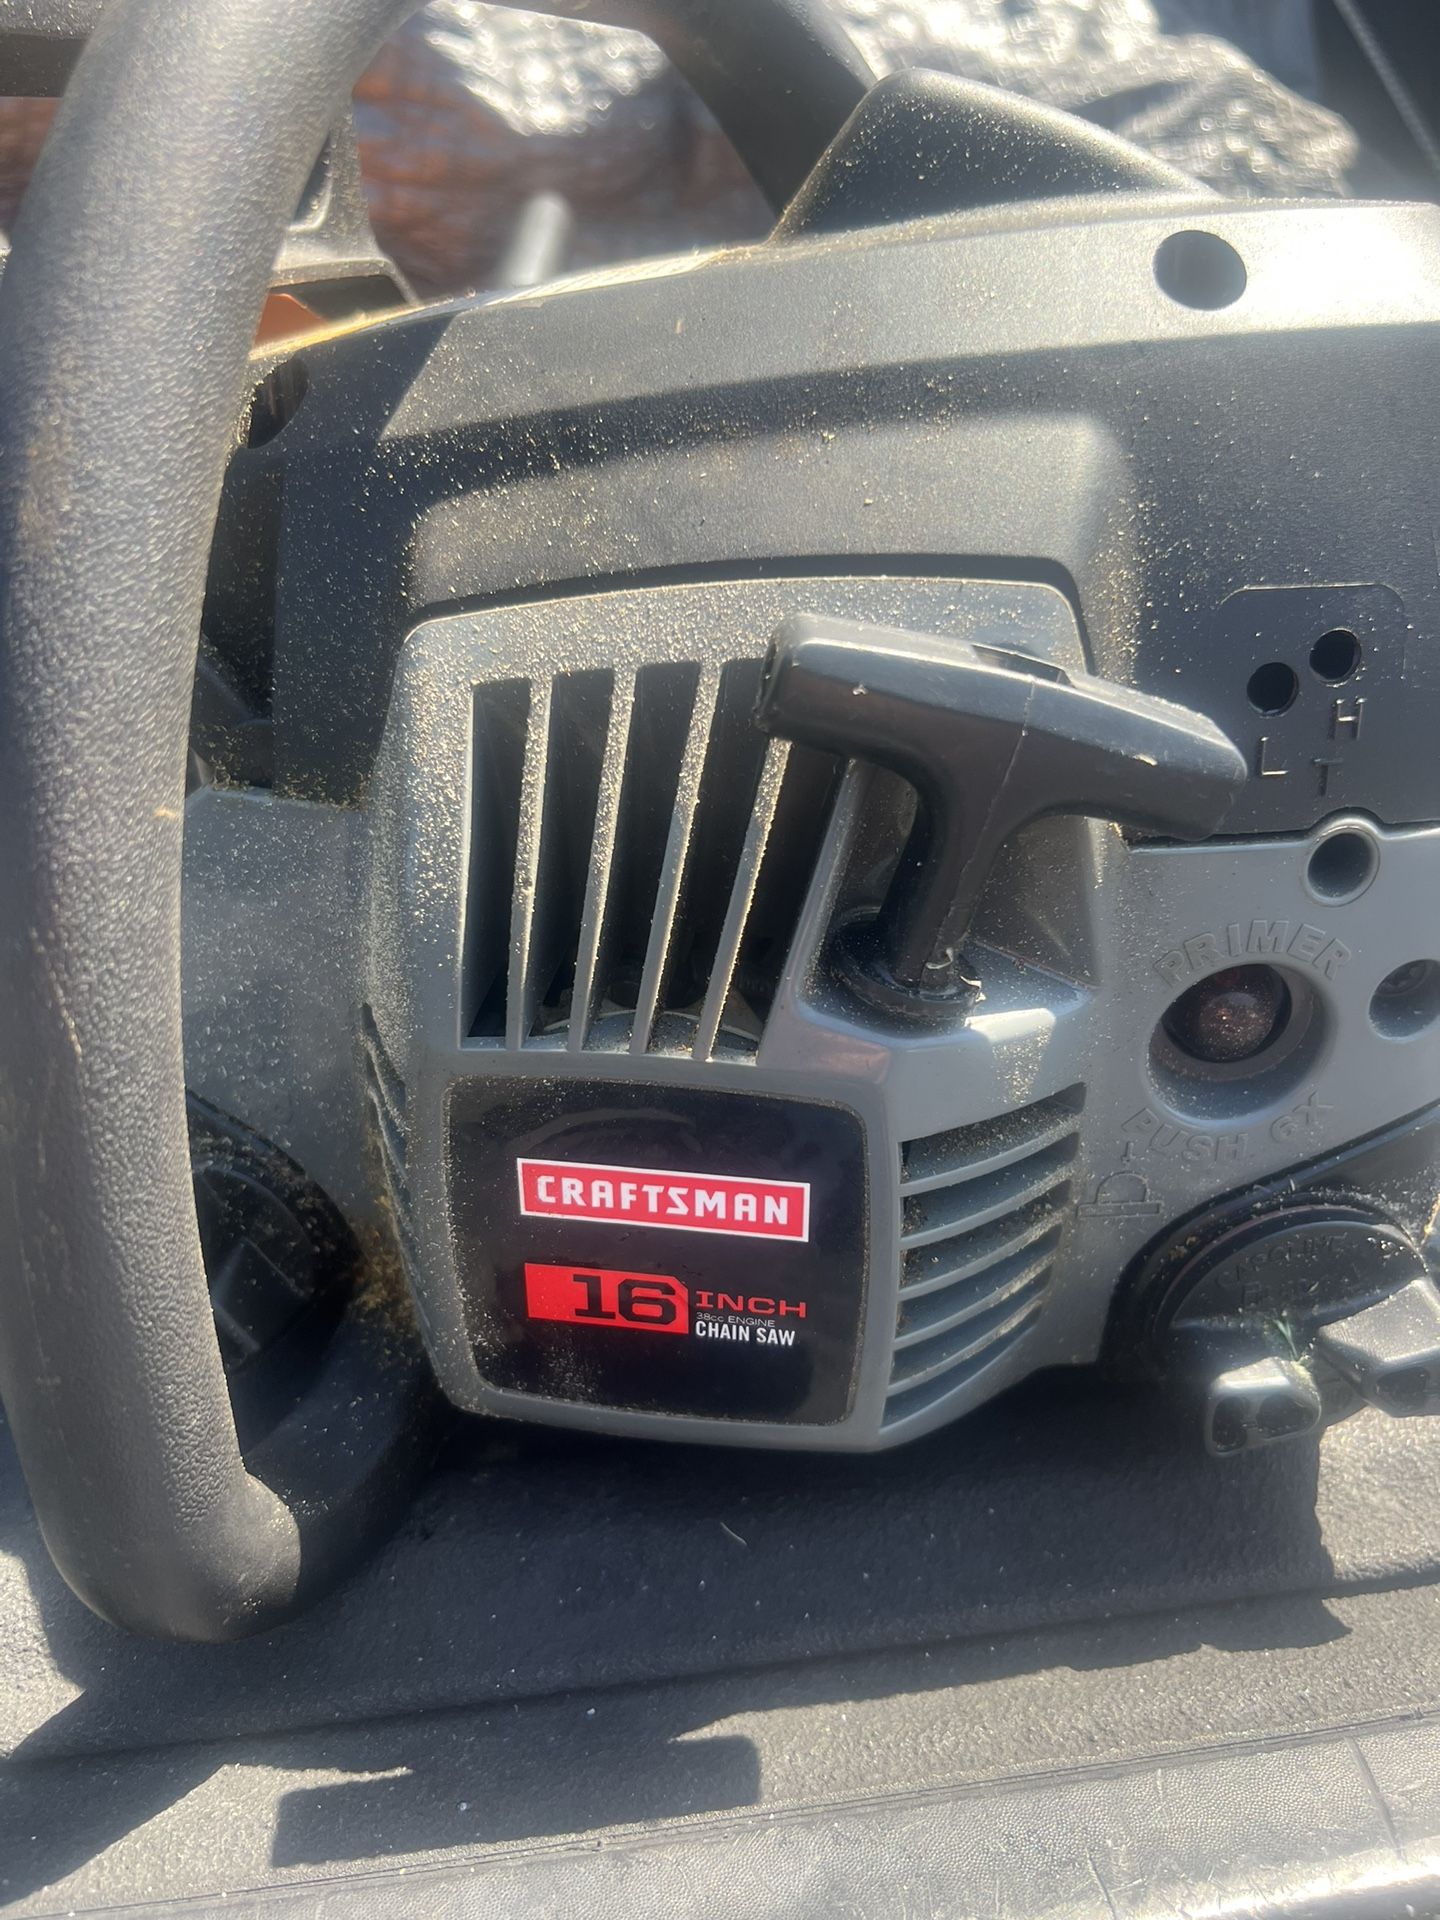 Craftsman Chainsaw 16” In Good Connections Black 